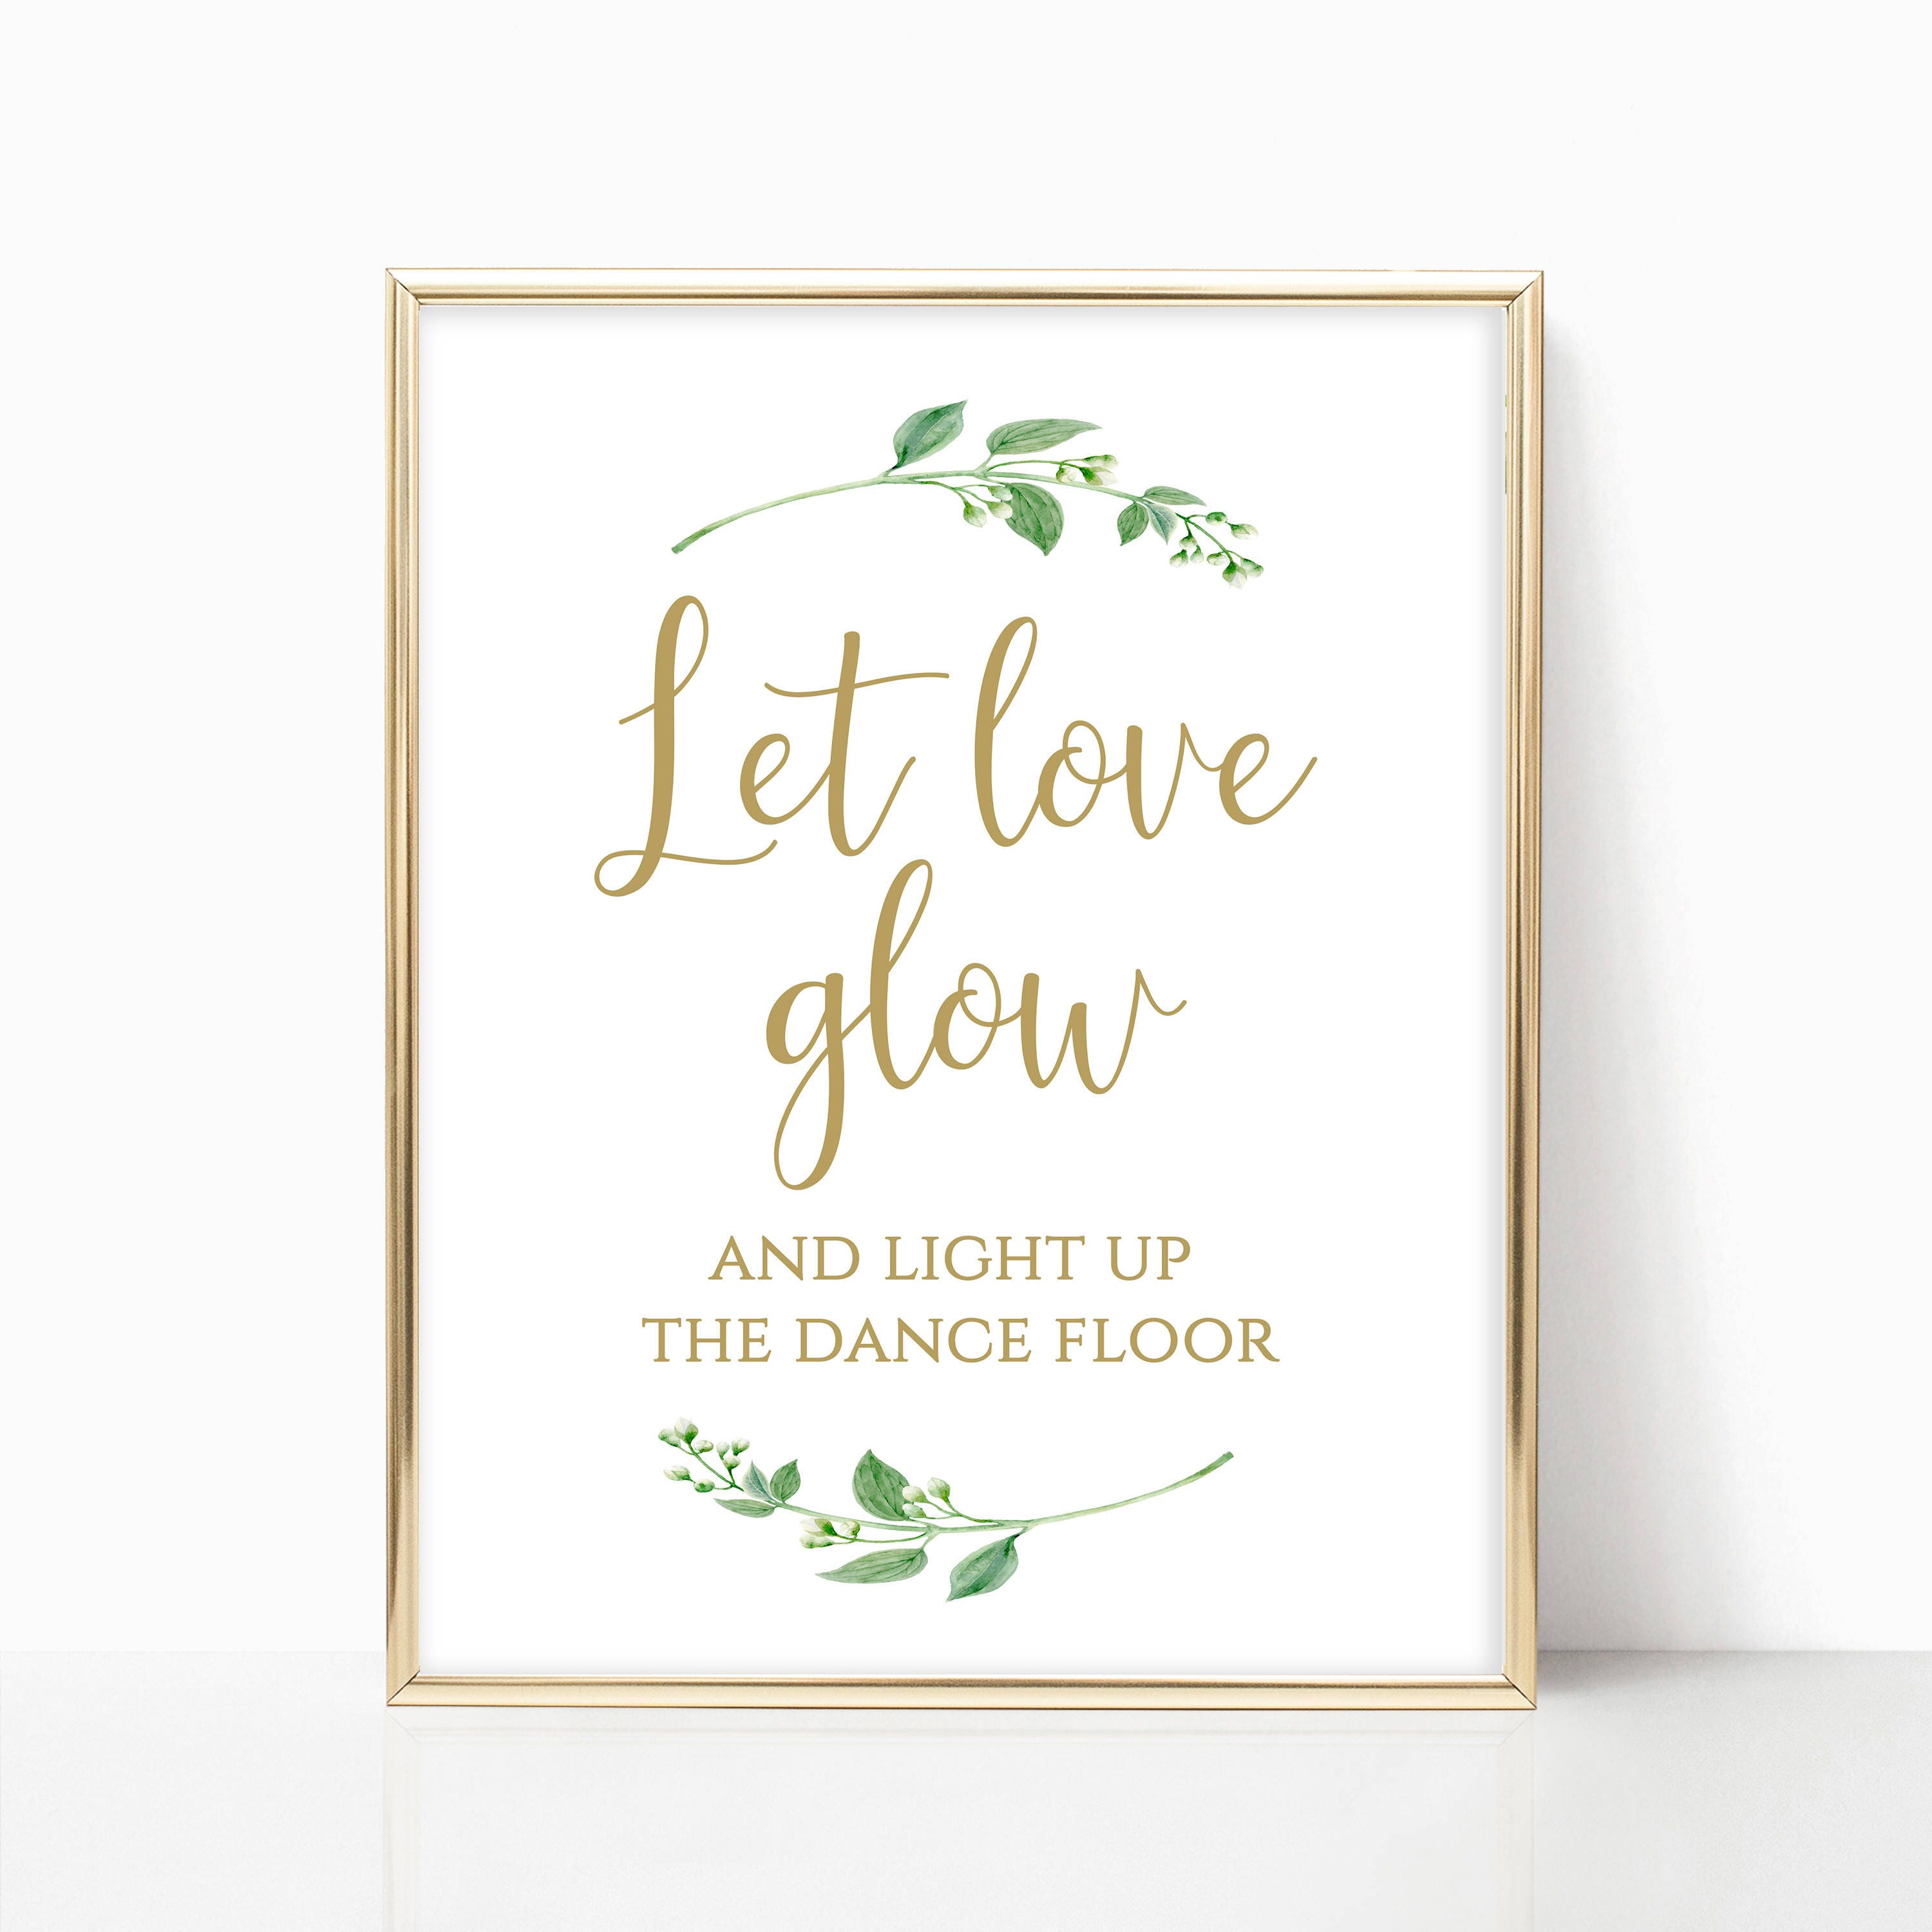 Let Love Glow Sign, Sparklers Sign, Glow Stick Wedding Sign Template, Glow  Sticks Send off Template, Wedding Glow Sticks Sign Celine 